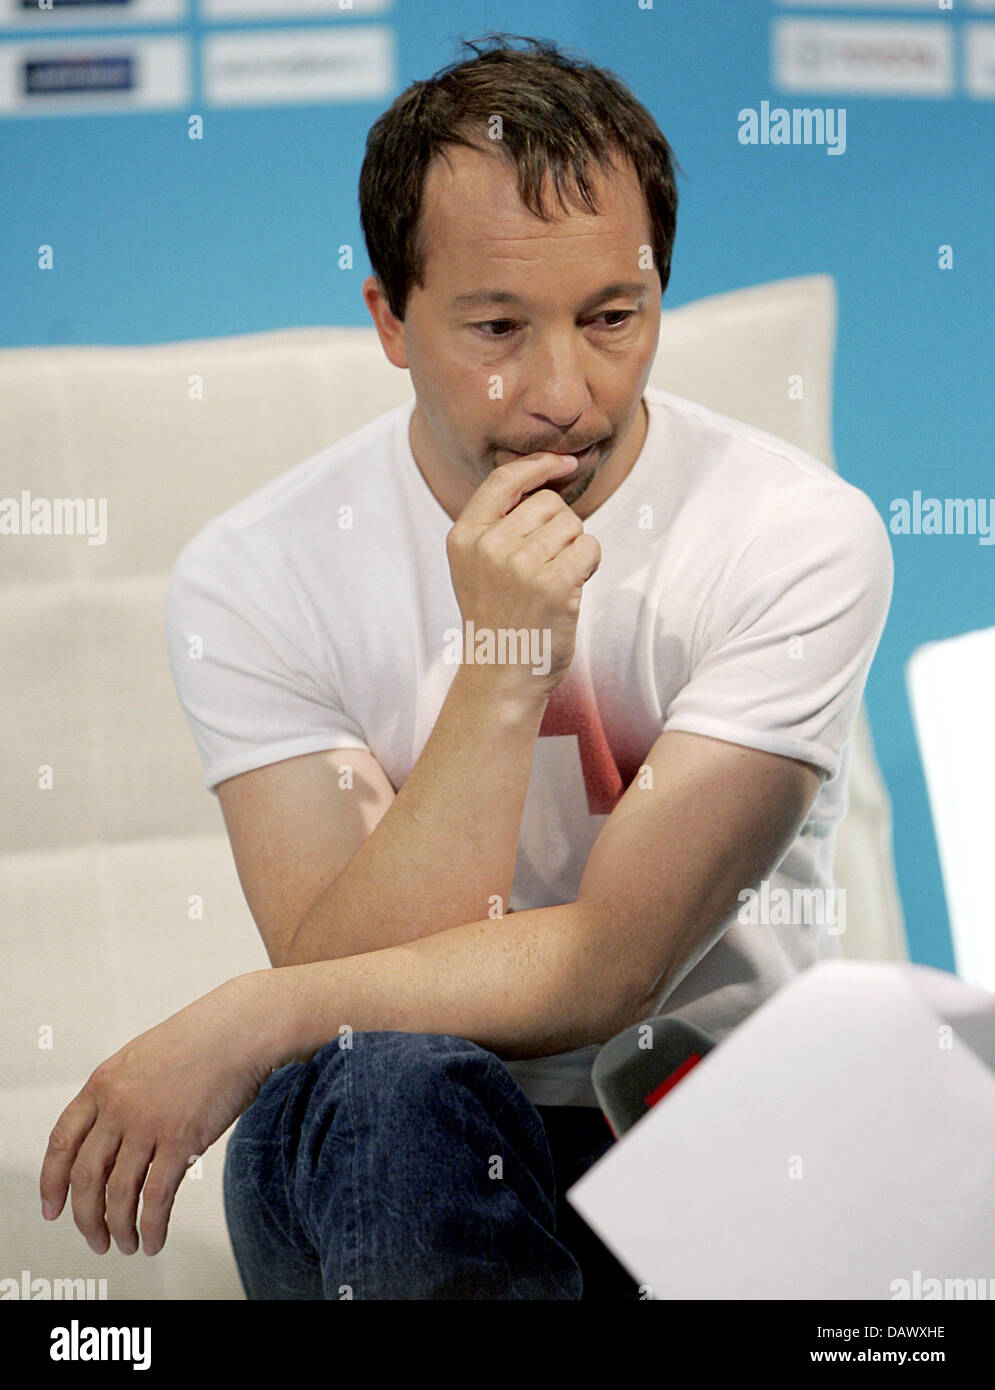 Swiss singer DJ Bobo looks down contemplatively during an interview in Helsinki, Finland, 11 May 2007. DJ Bobo droped out of yesterday's Eurovision Song Contest semi-finals. The finals will take place on Saturday, 12 May. Photo: Joerg Carstensen Stock Photo